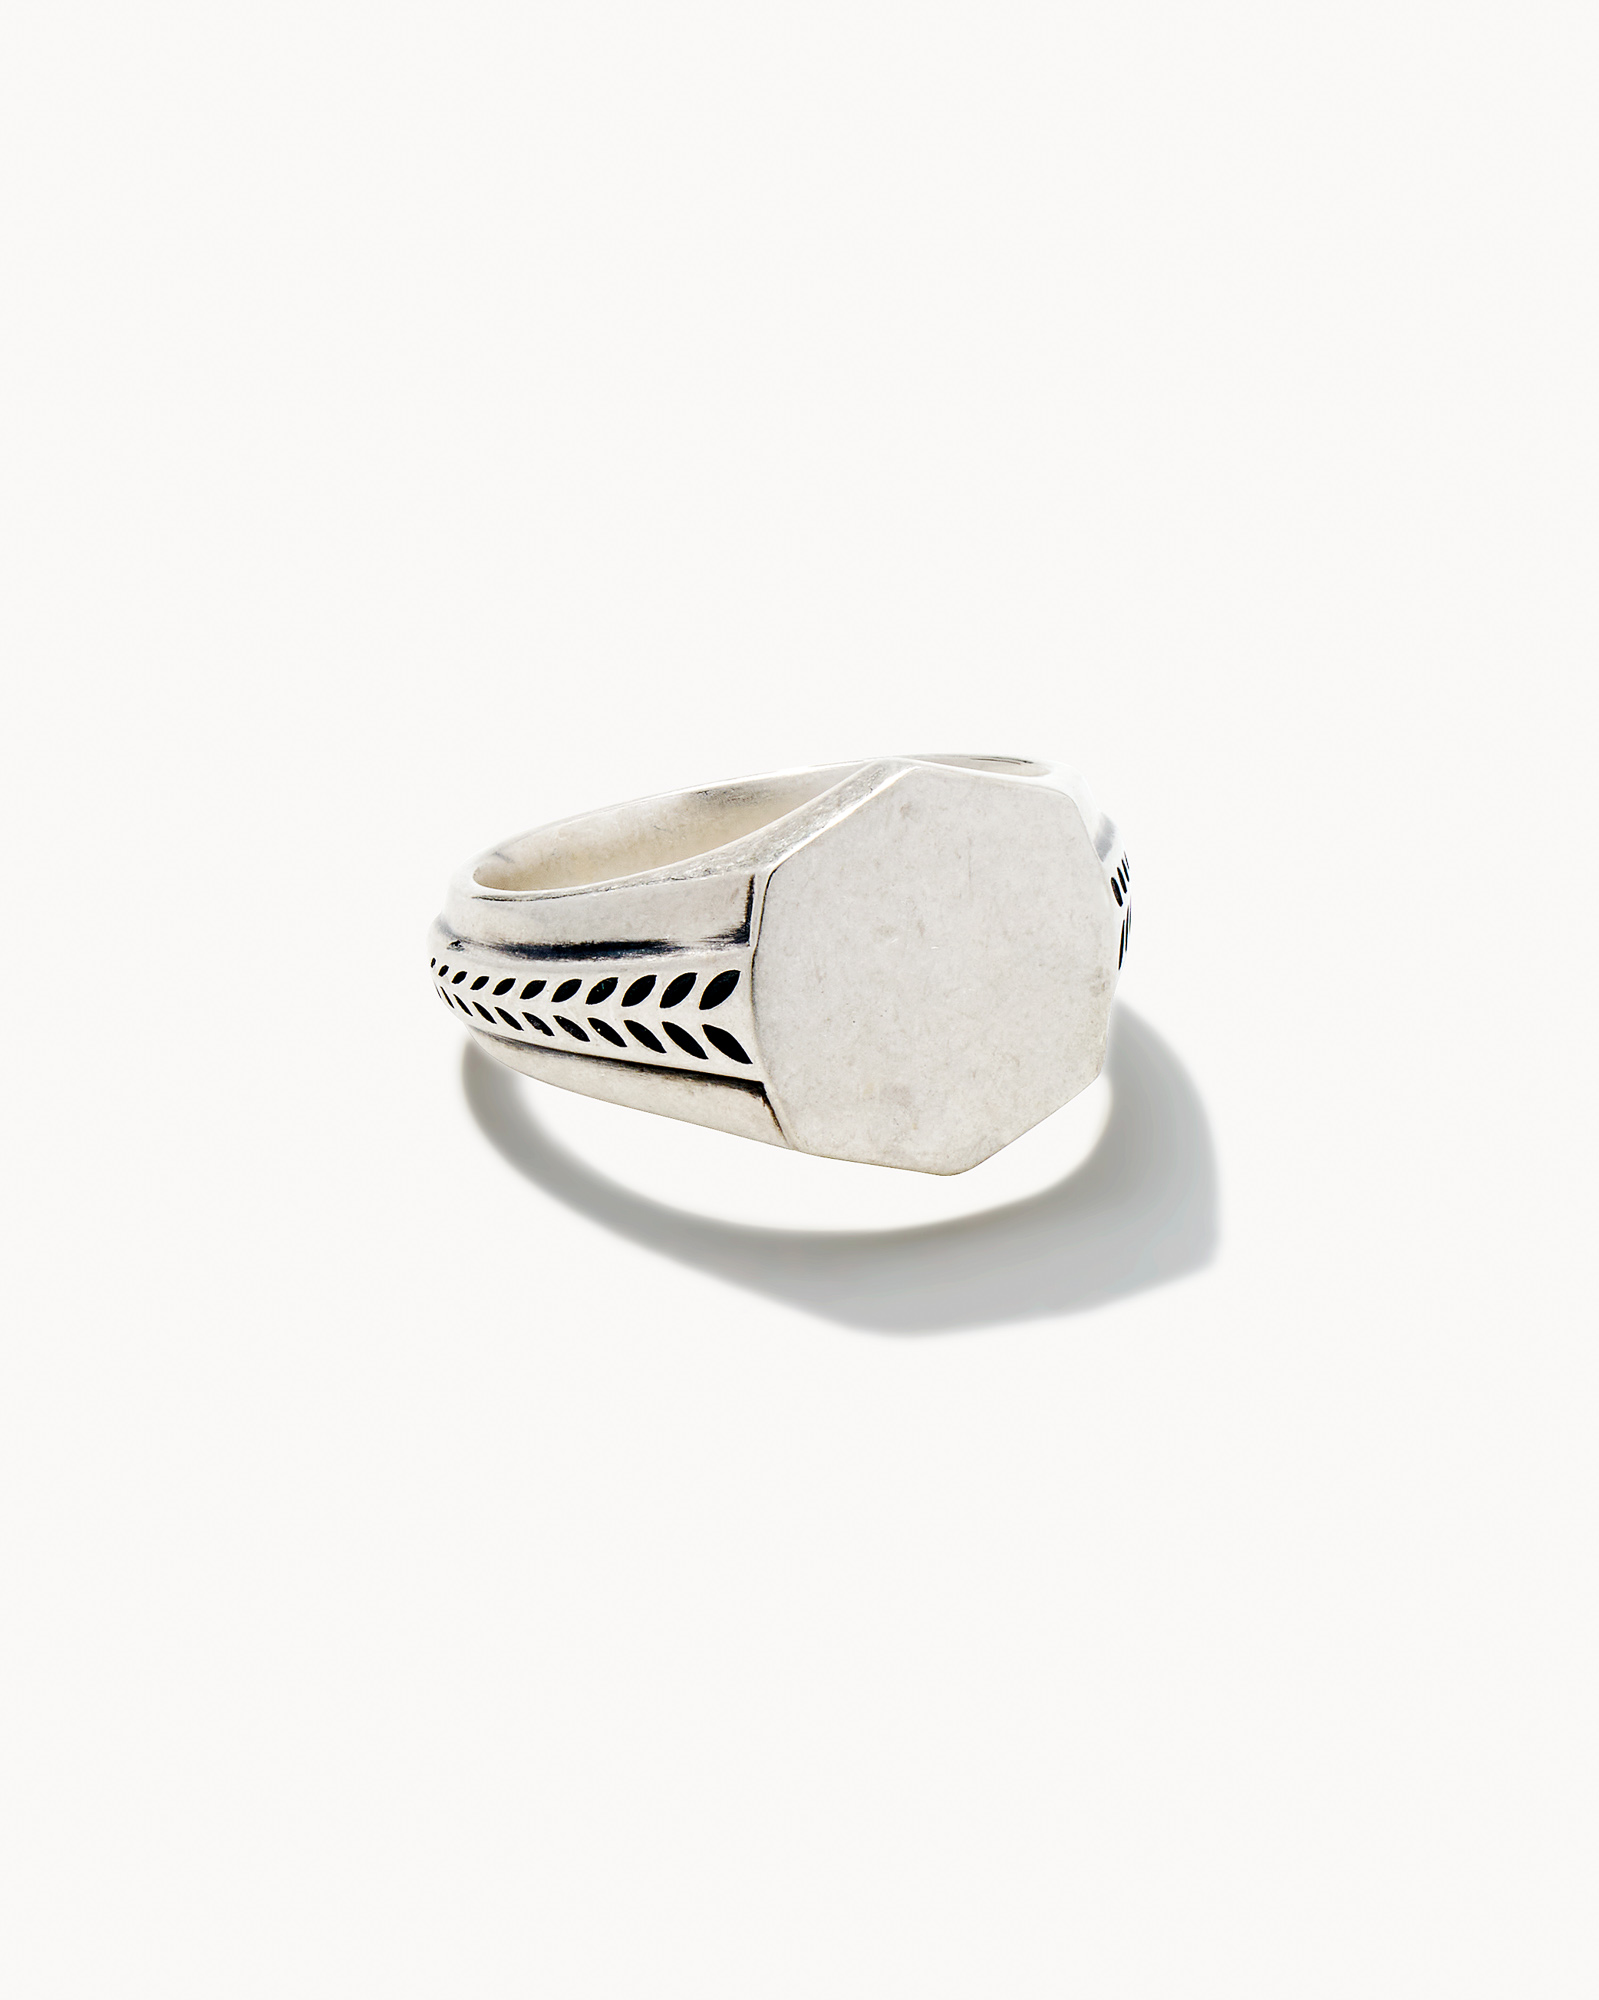 Paine Gillic Spanning vonnis Hicks Signet Ring in Oxidized Sterling Silver